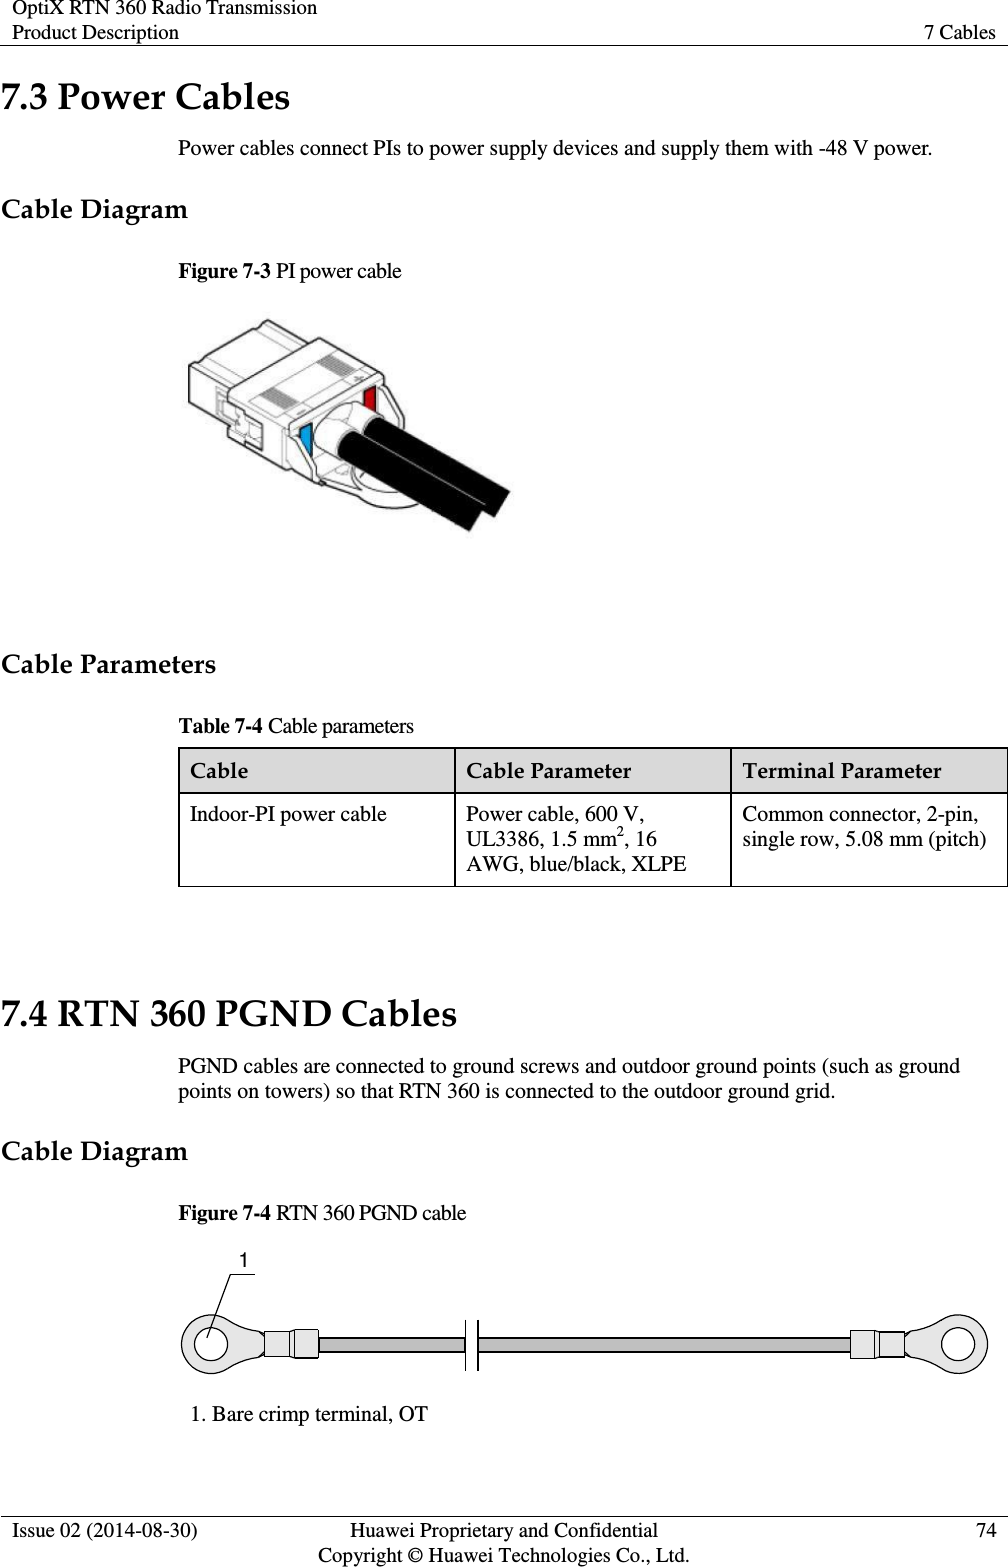 OptiX RTN 360 Radio Transmission Product Description 7 Cables  Issue 02 (2014-08-30) Huawei Proprietary and Confidential                                     Copyright © Huawei Technologies Co., Ltd. 74  7.3 Power Cables Power cables connect PIs to power supply devices and supply them with -48 V power. Cable Diagram Figure 7-3 PI power cable   Cable Parameters Table 7-4 Cable parameters Cable Cable Parameter Terminal Parameter Indoor-PI power cable Power cable, 600 V, UL3386, 1.5 mm2, 16 AWG, blue/black, XLPE Common connector, 2-pin, single row, 5.08 mm (pitch)  7.4 RTN 360 PGND Cables PGND cables are connected to ground screws and outdoor ground points (such as ground points on towers) so that RTN 360 is connected to the outdoor ground grid.   Cable Diagram Figure 7-4 RTN 360 PGND cable 1 1. Bare crimp terminal, OT 